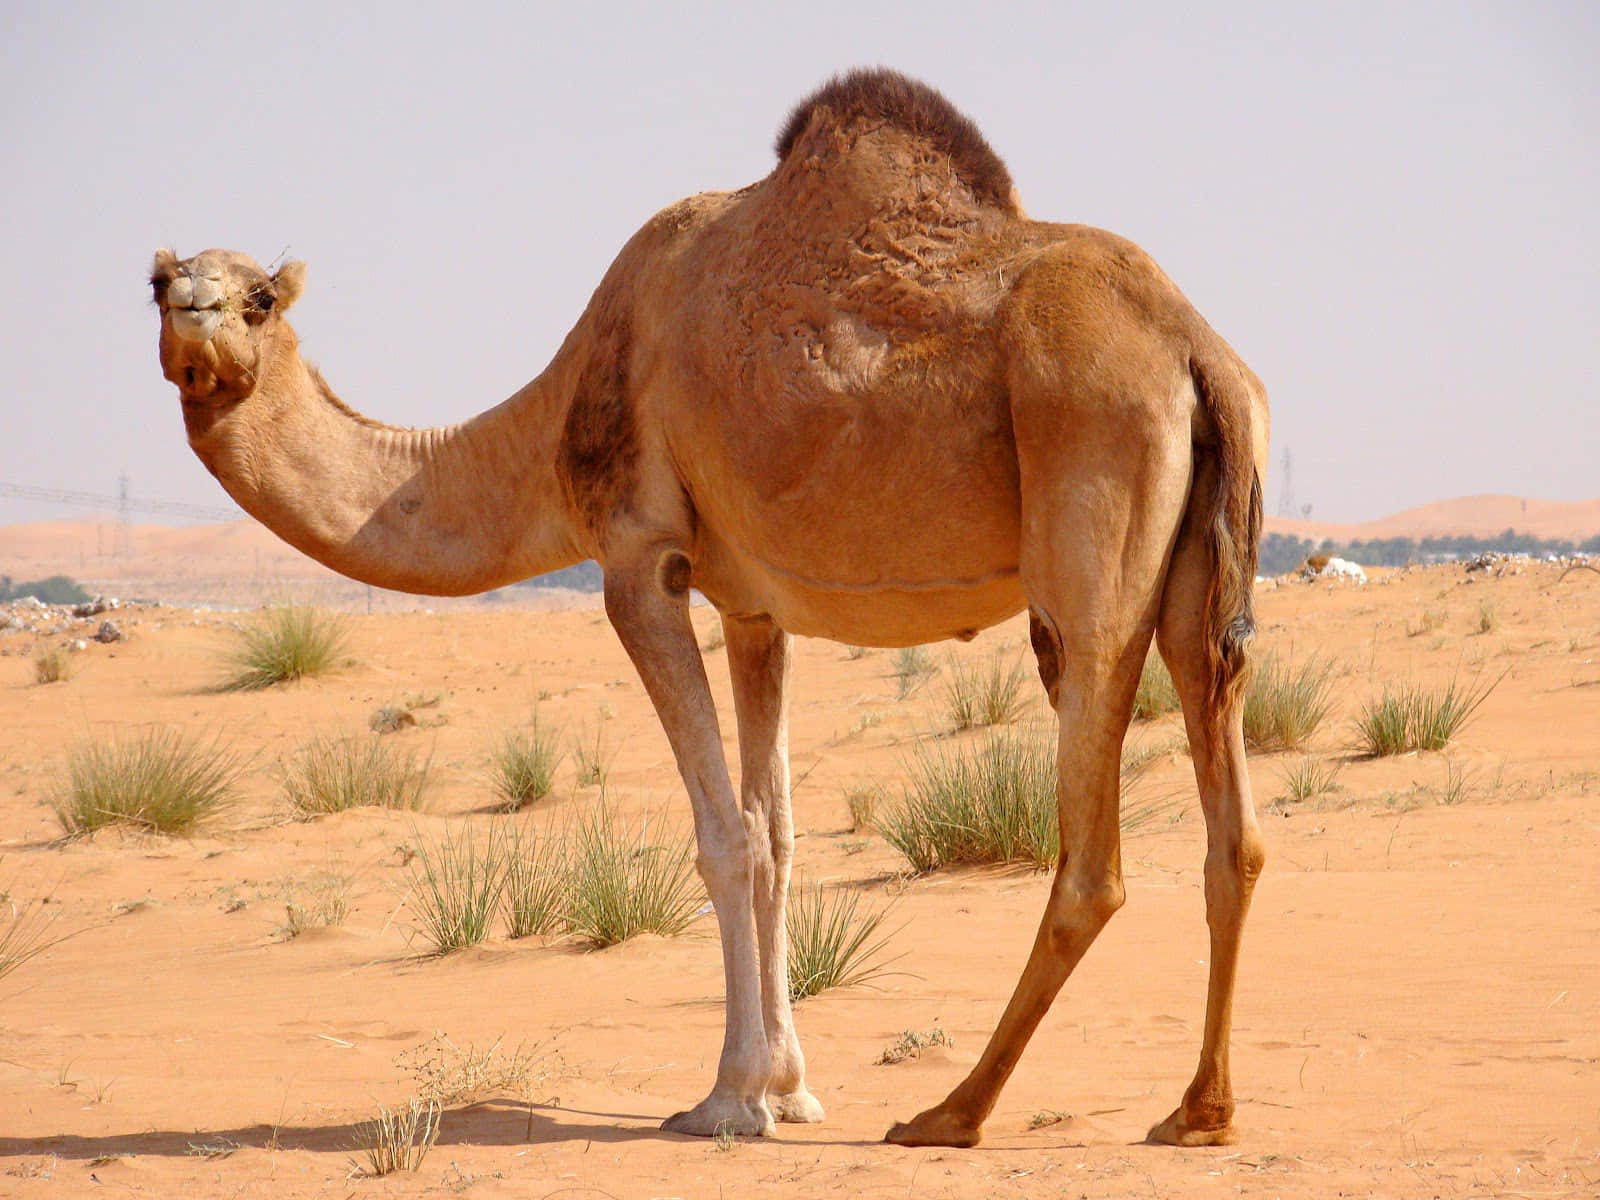 A Tired but Upright Camel in a Sand Dune